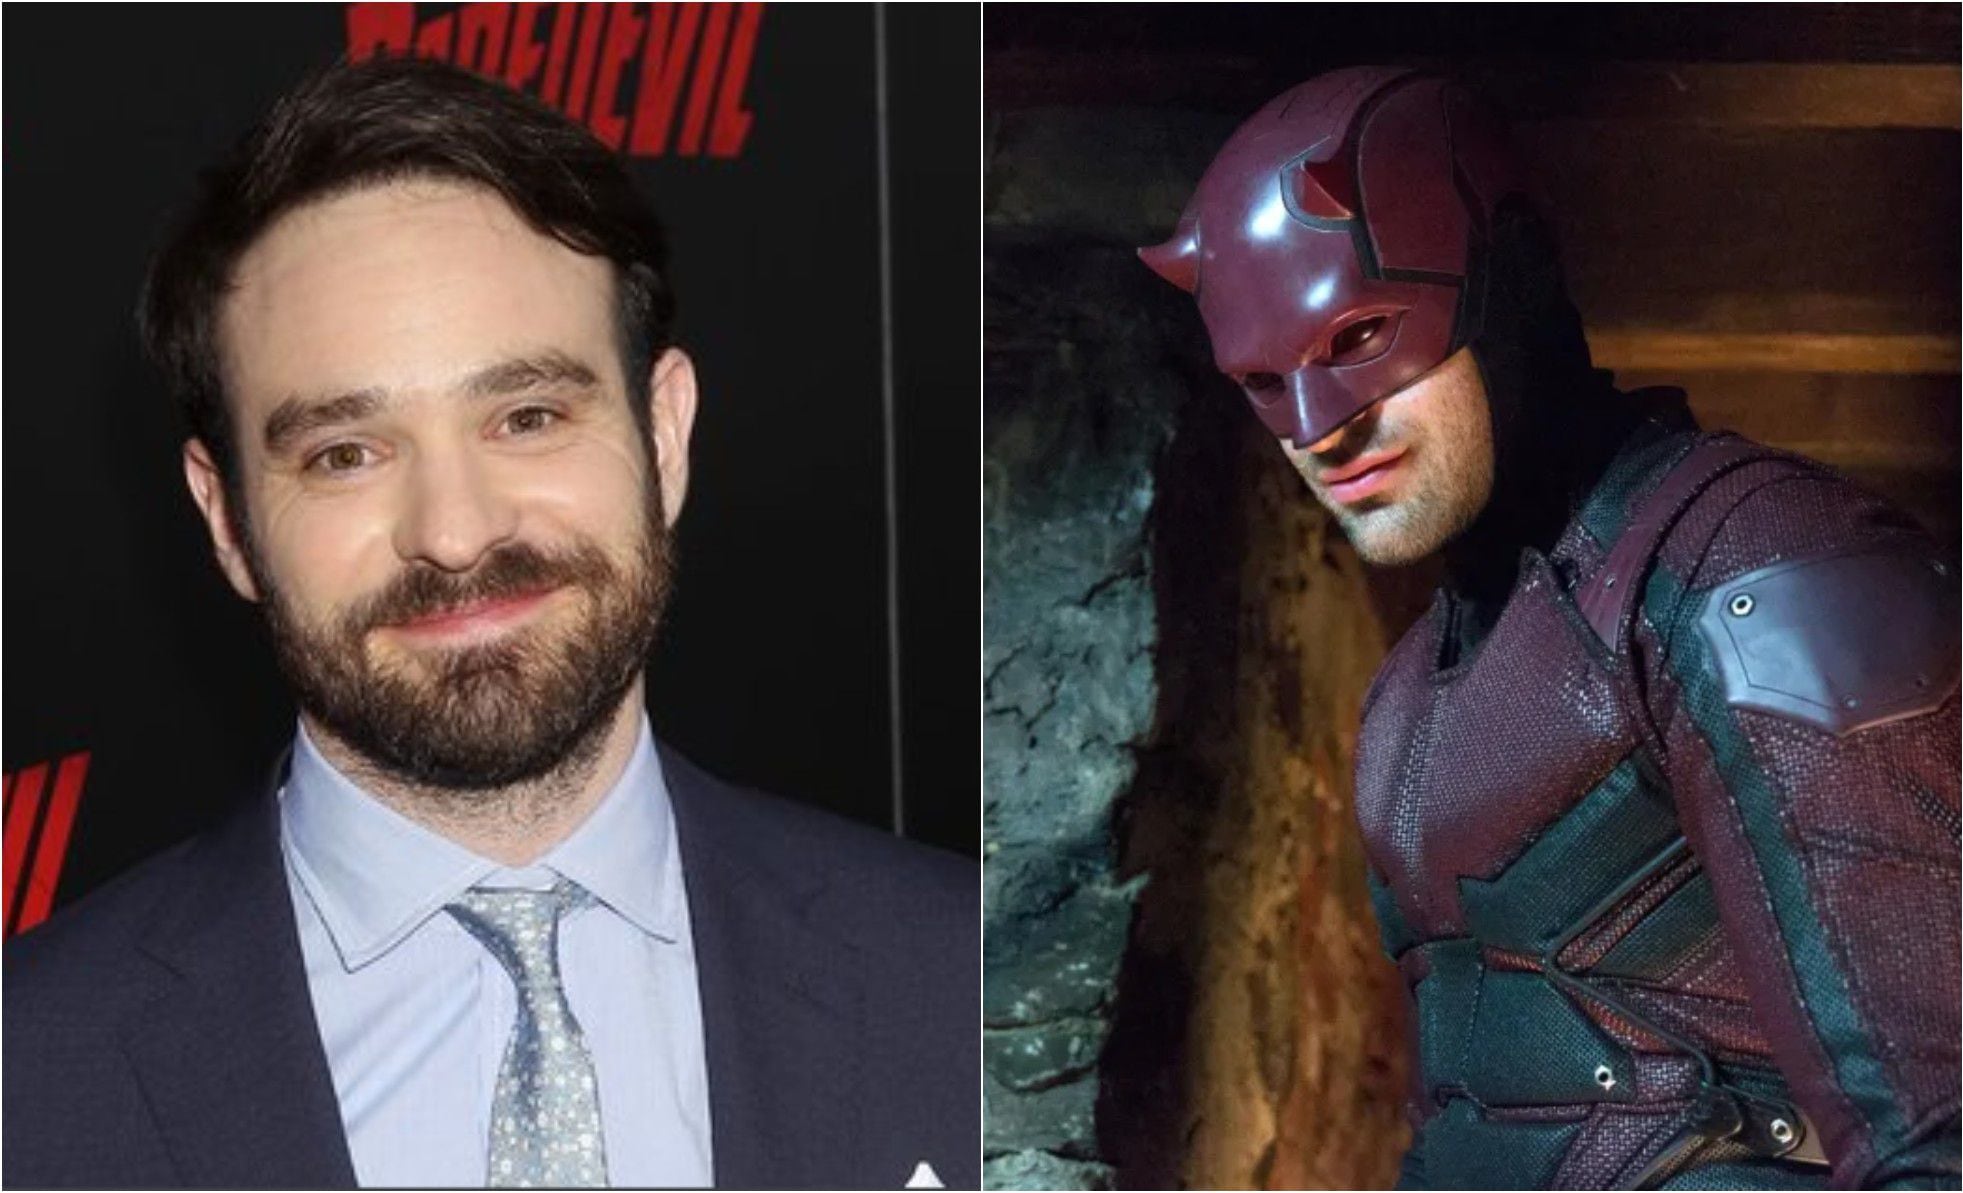 Charlie Cox Returns to Play “Daredevil” in the Marvel Universe, According to Kevin Feige